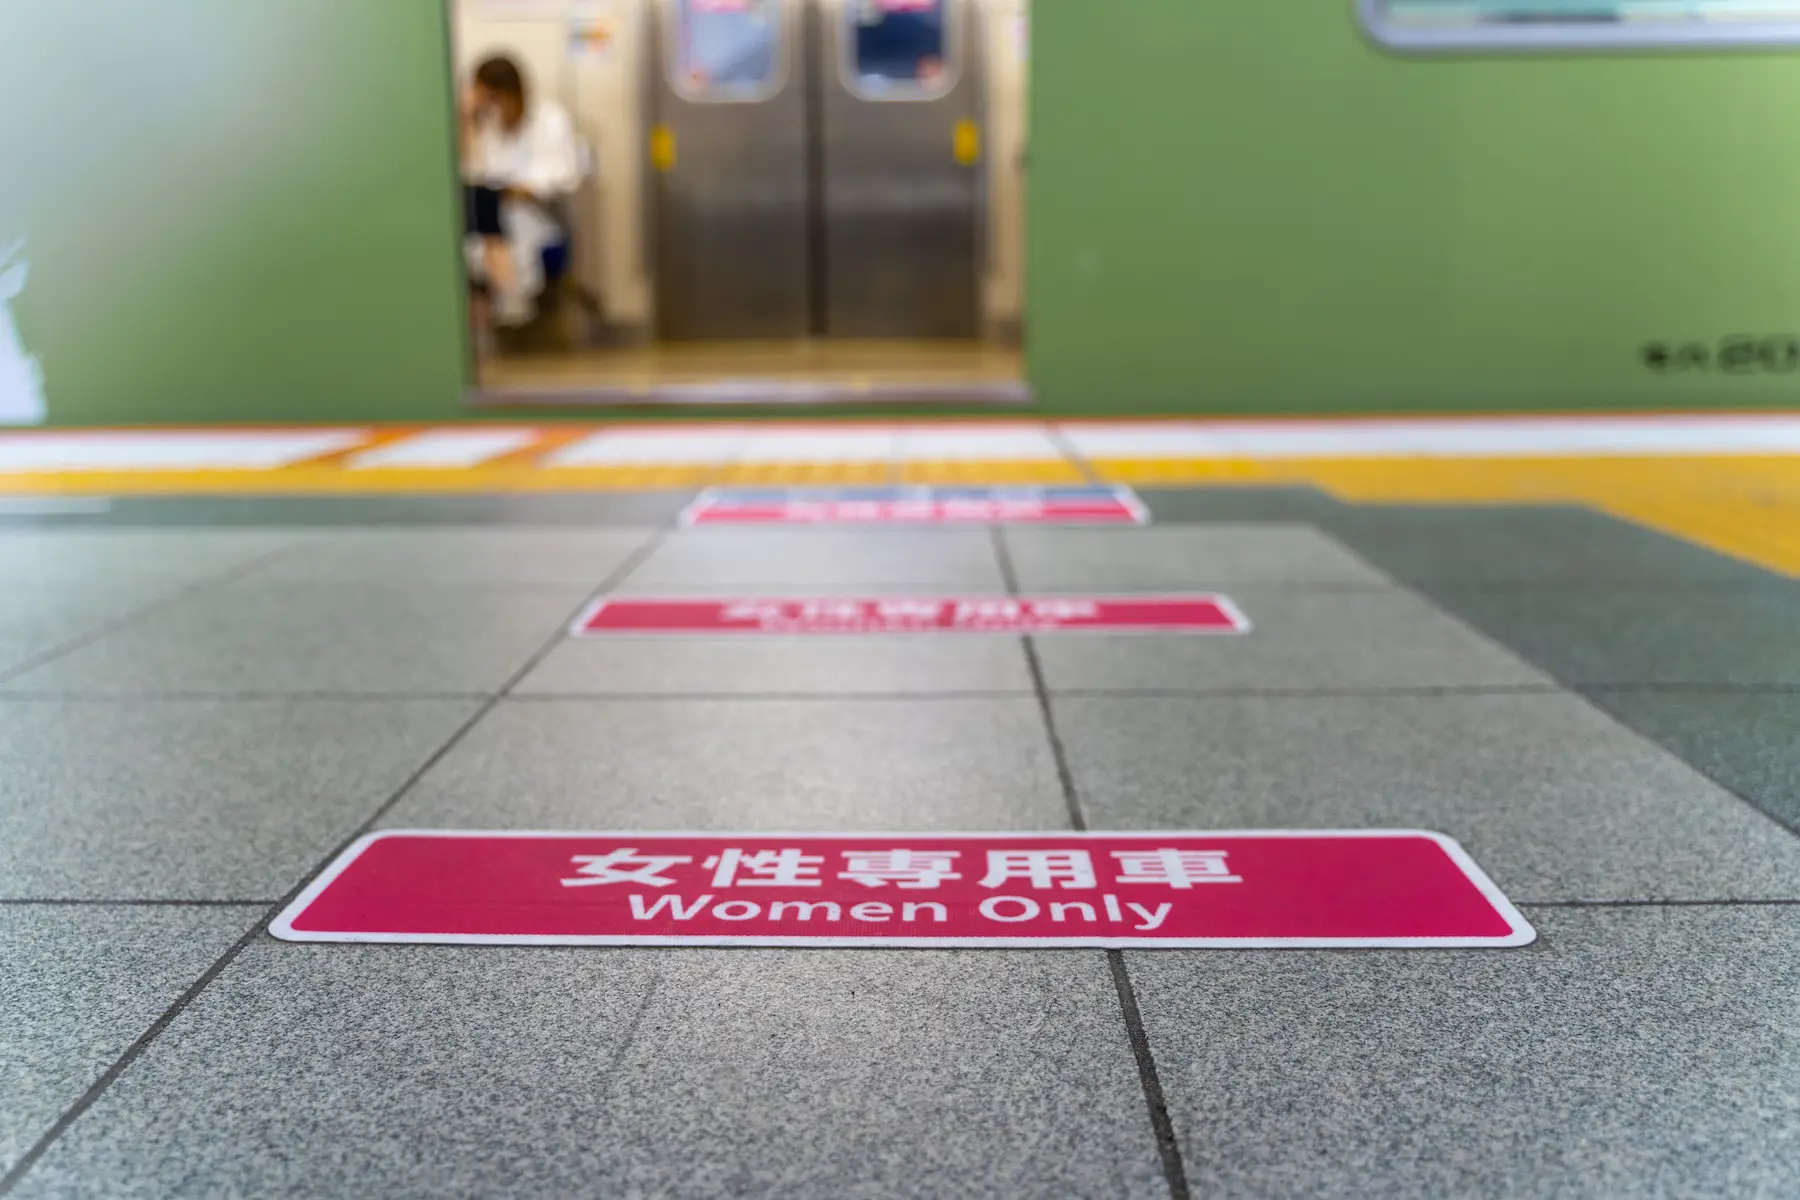 Rectangular pink signs on the ground of a train platform in Osaka, Japan read 